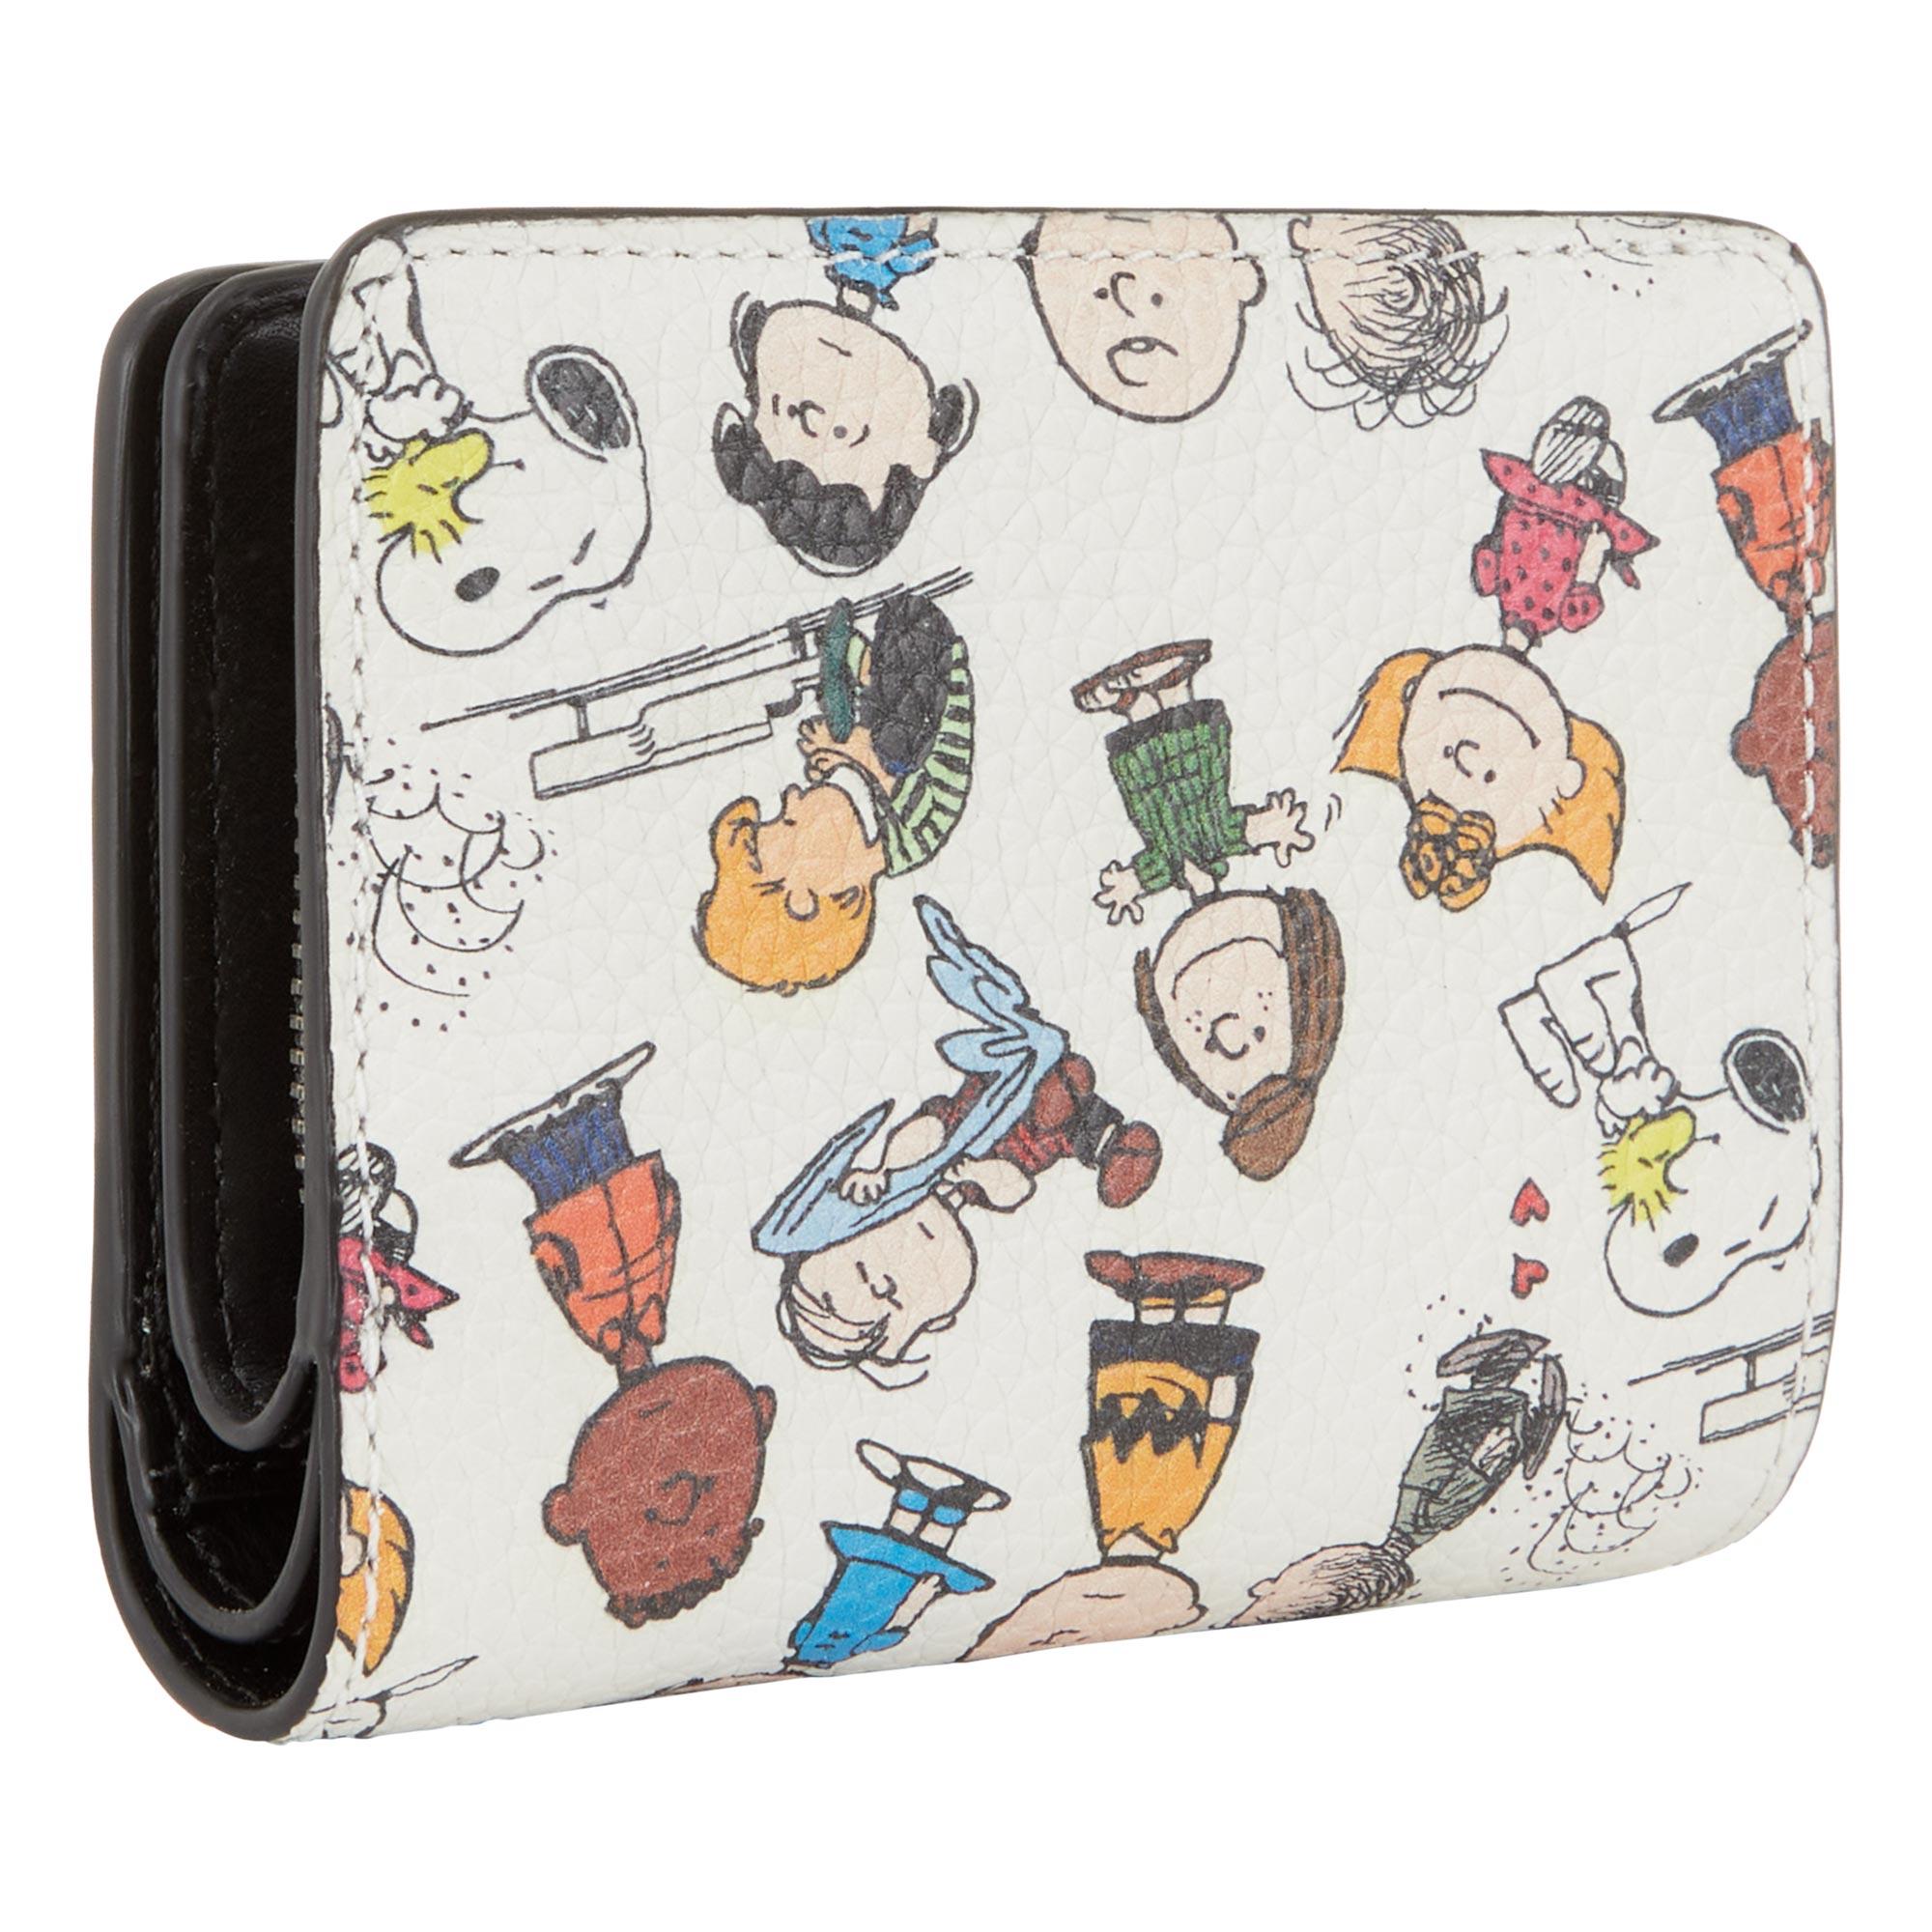 Peanuts Leather Foldover Wallet